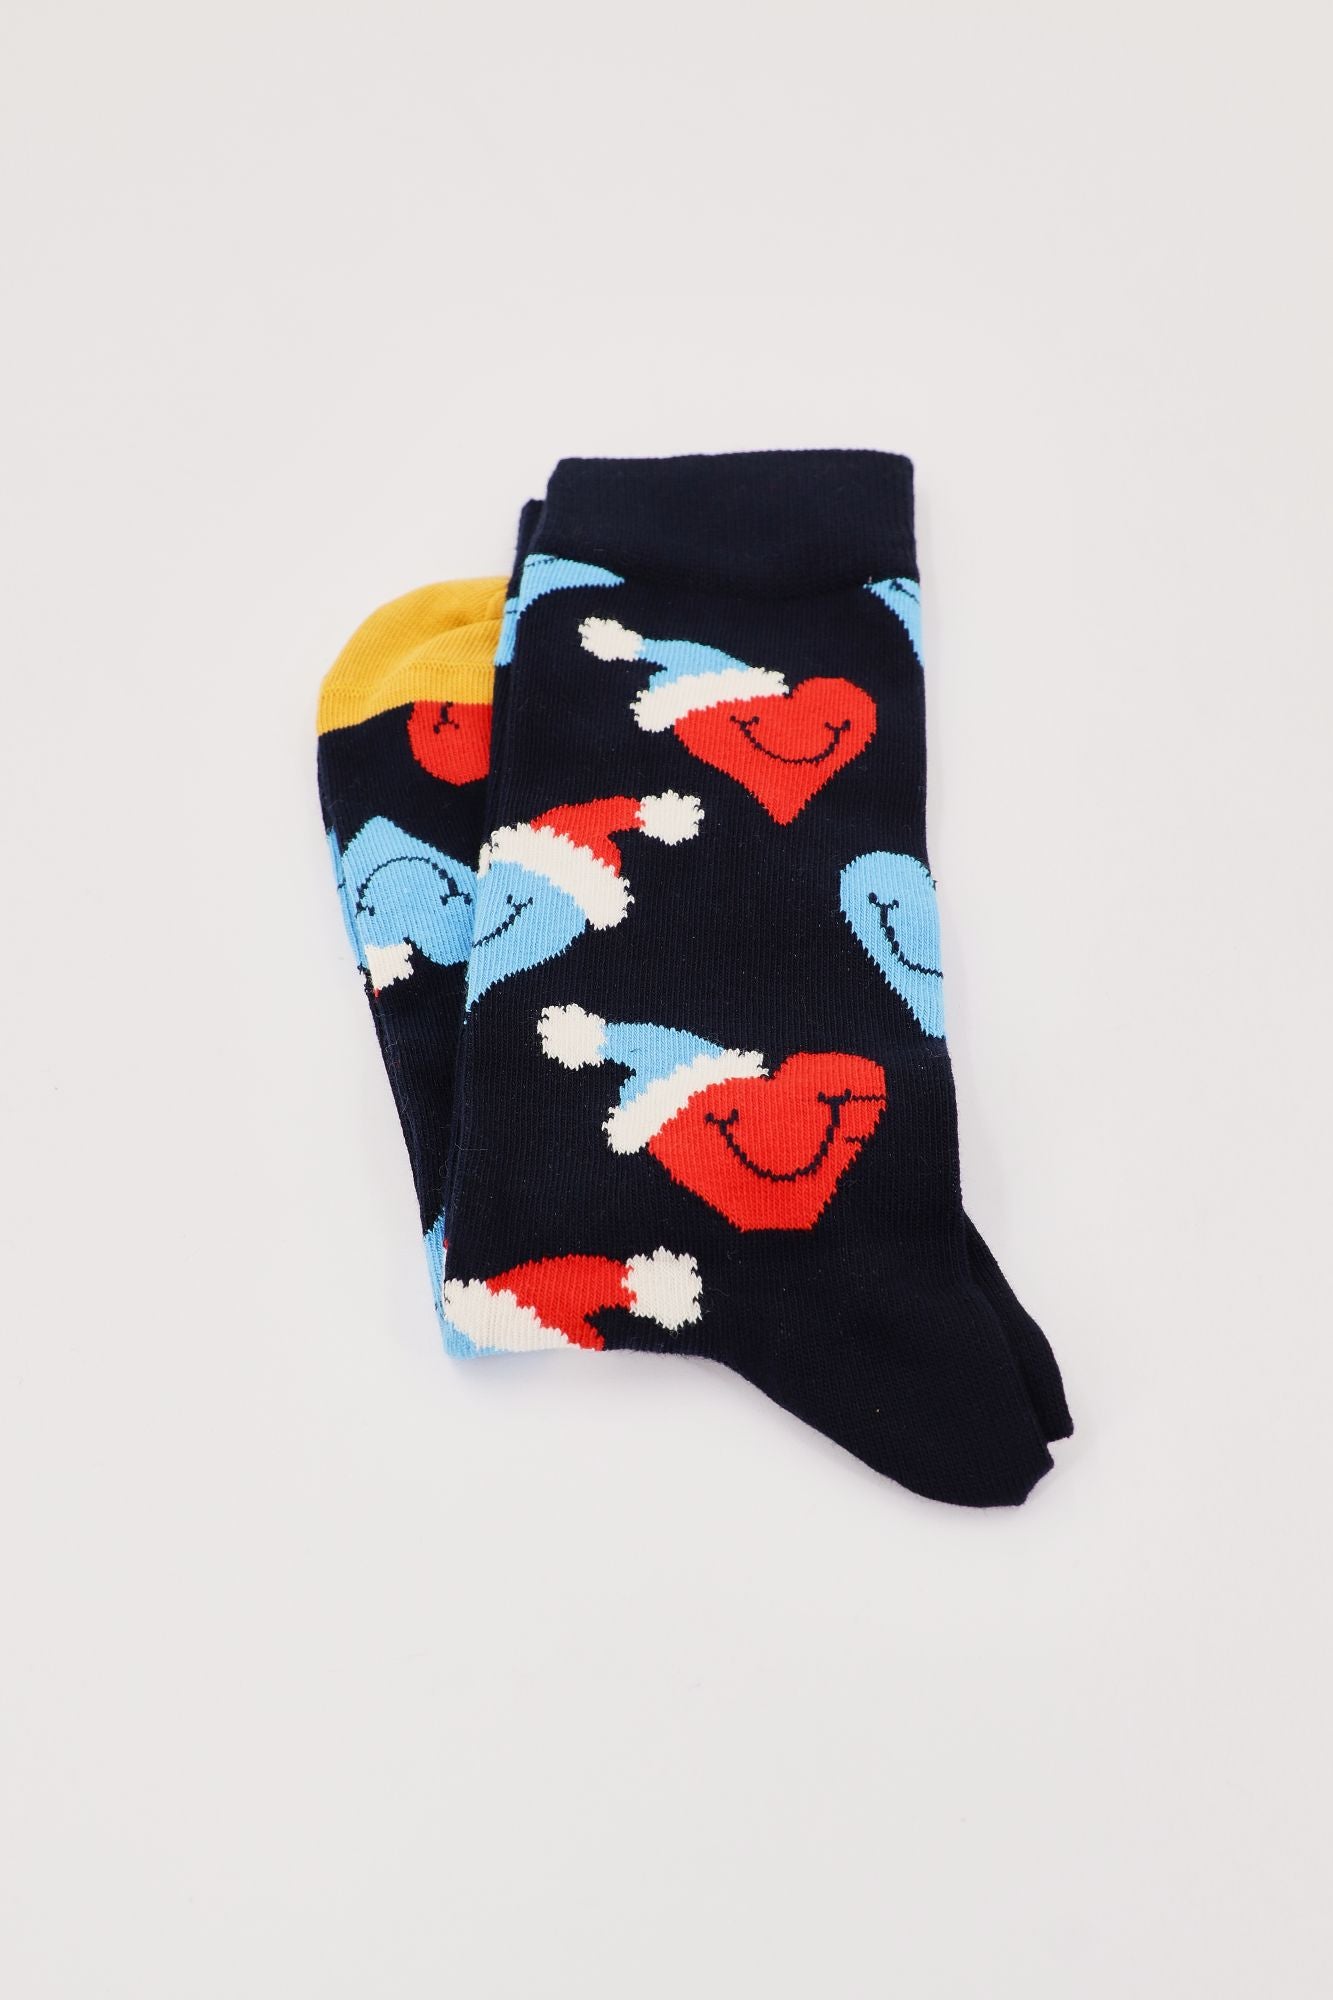 HAPPY SOCKS PACK HOLIDAY VIBES GIFT en color NEGRO (2)